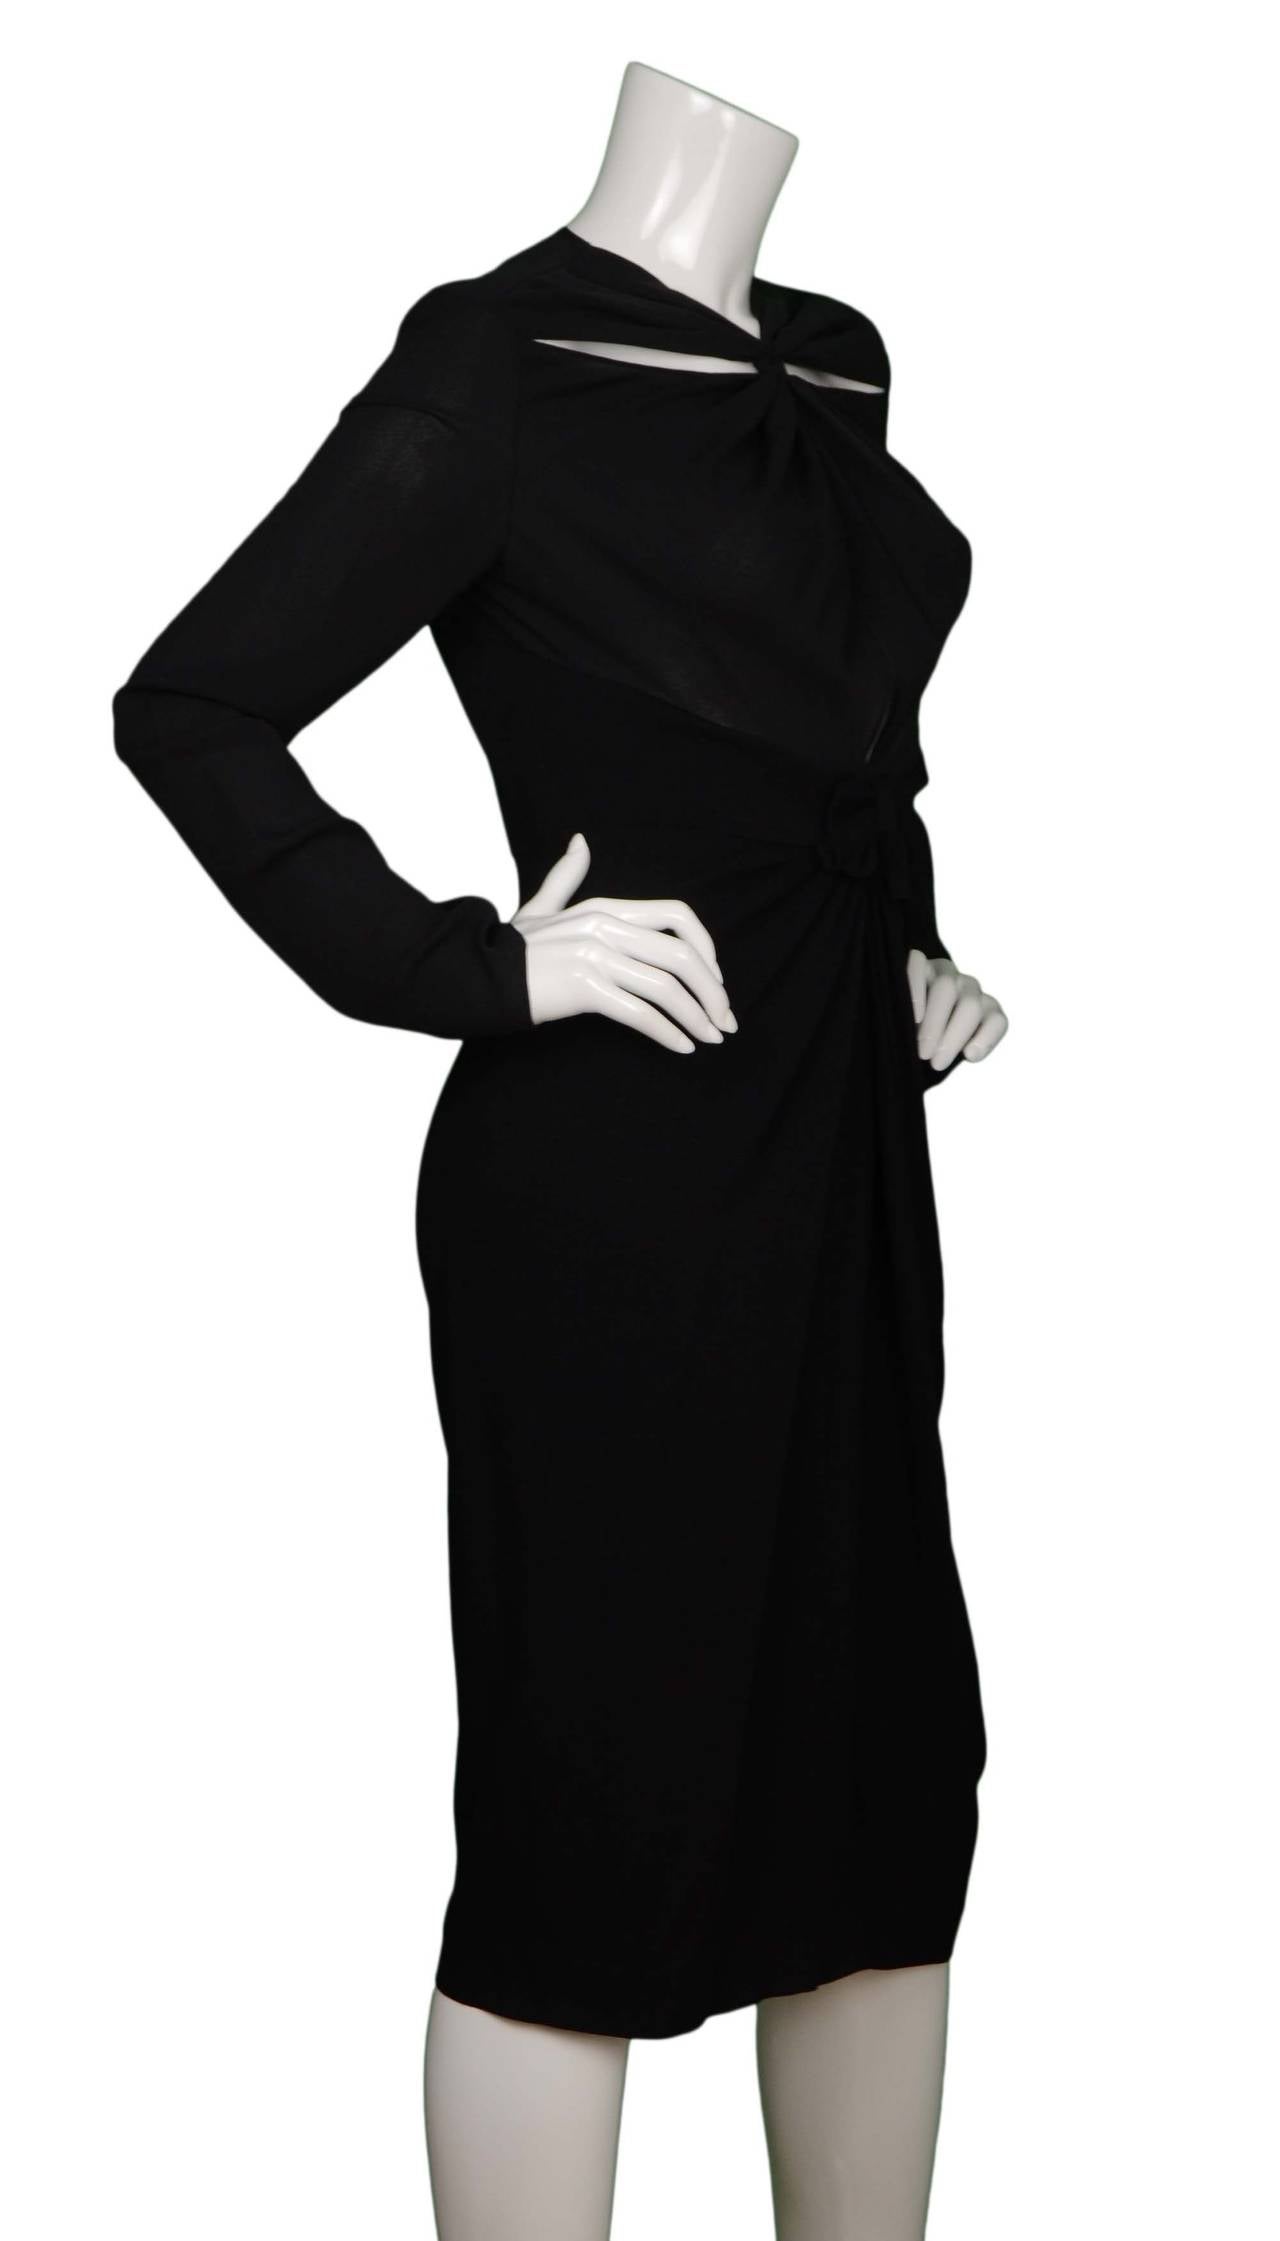 Proenza Schouler Black Crepe Long Sleeve Cocktail Dress
Features two cut outs at neckline and bow at front center waistline 
Made in: China
Color: Black
Composition: 100% viscose with silk trim
Closure/opening: Center back zip up
Exterior